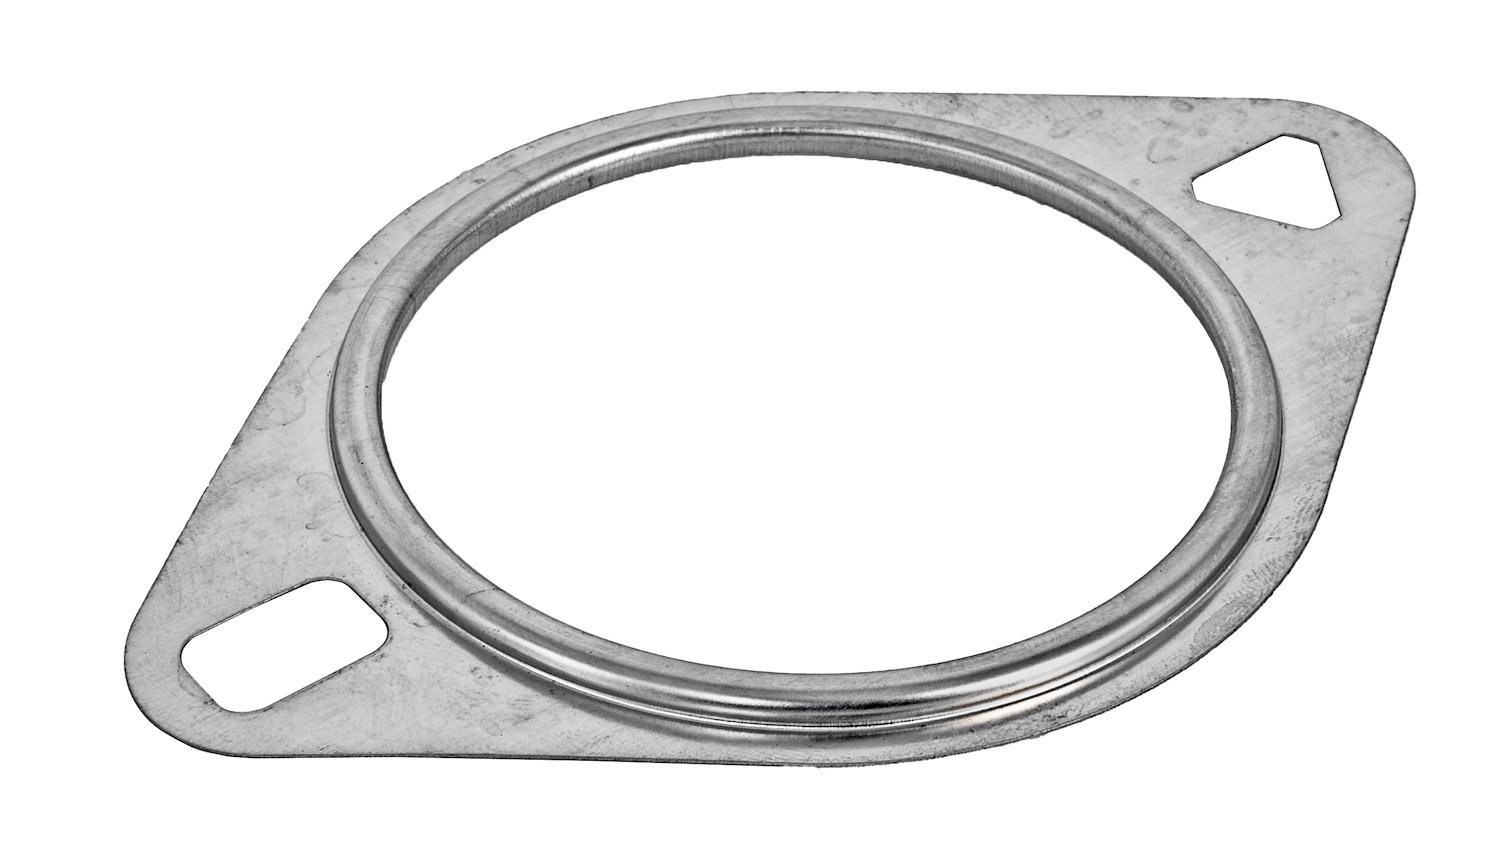 Exhaust Manifold Gasket for JEGS 30140 & 30142 Exhaust Manifolds